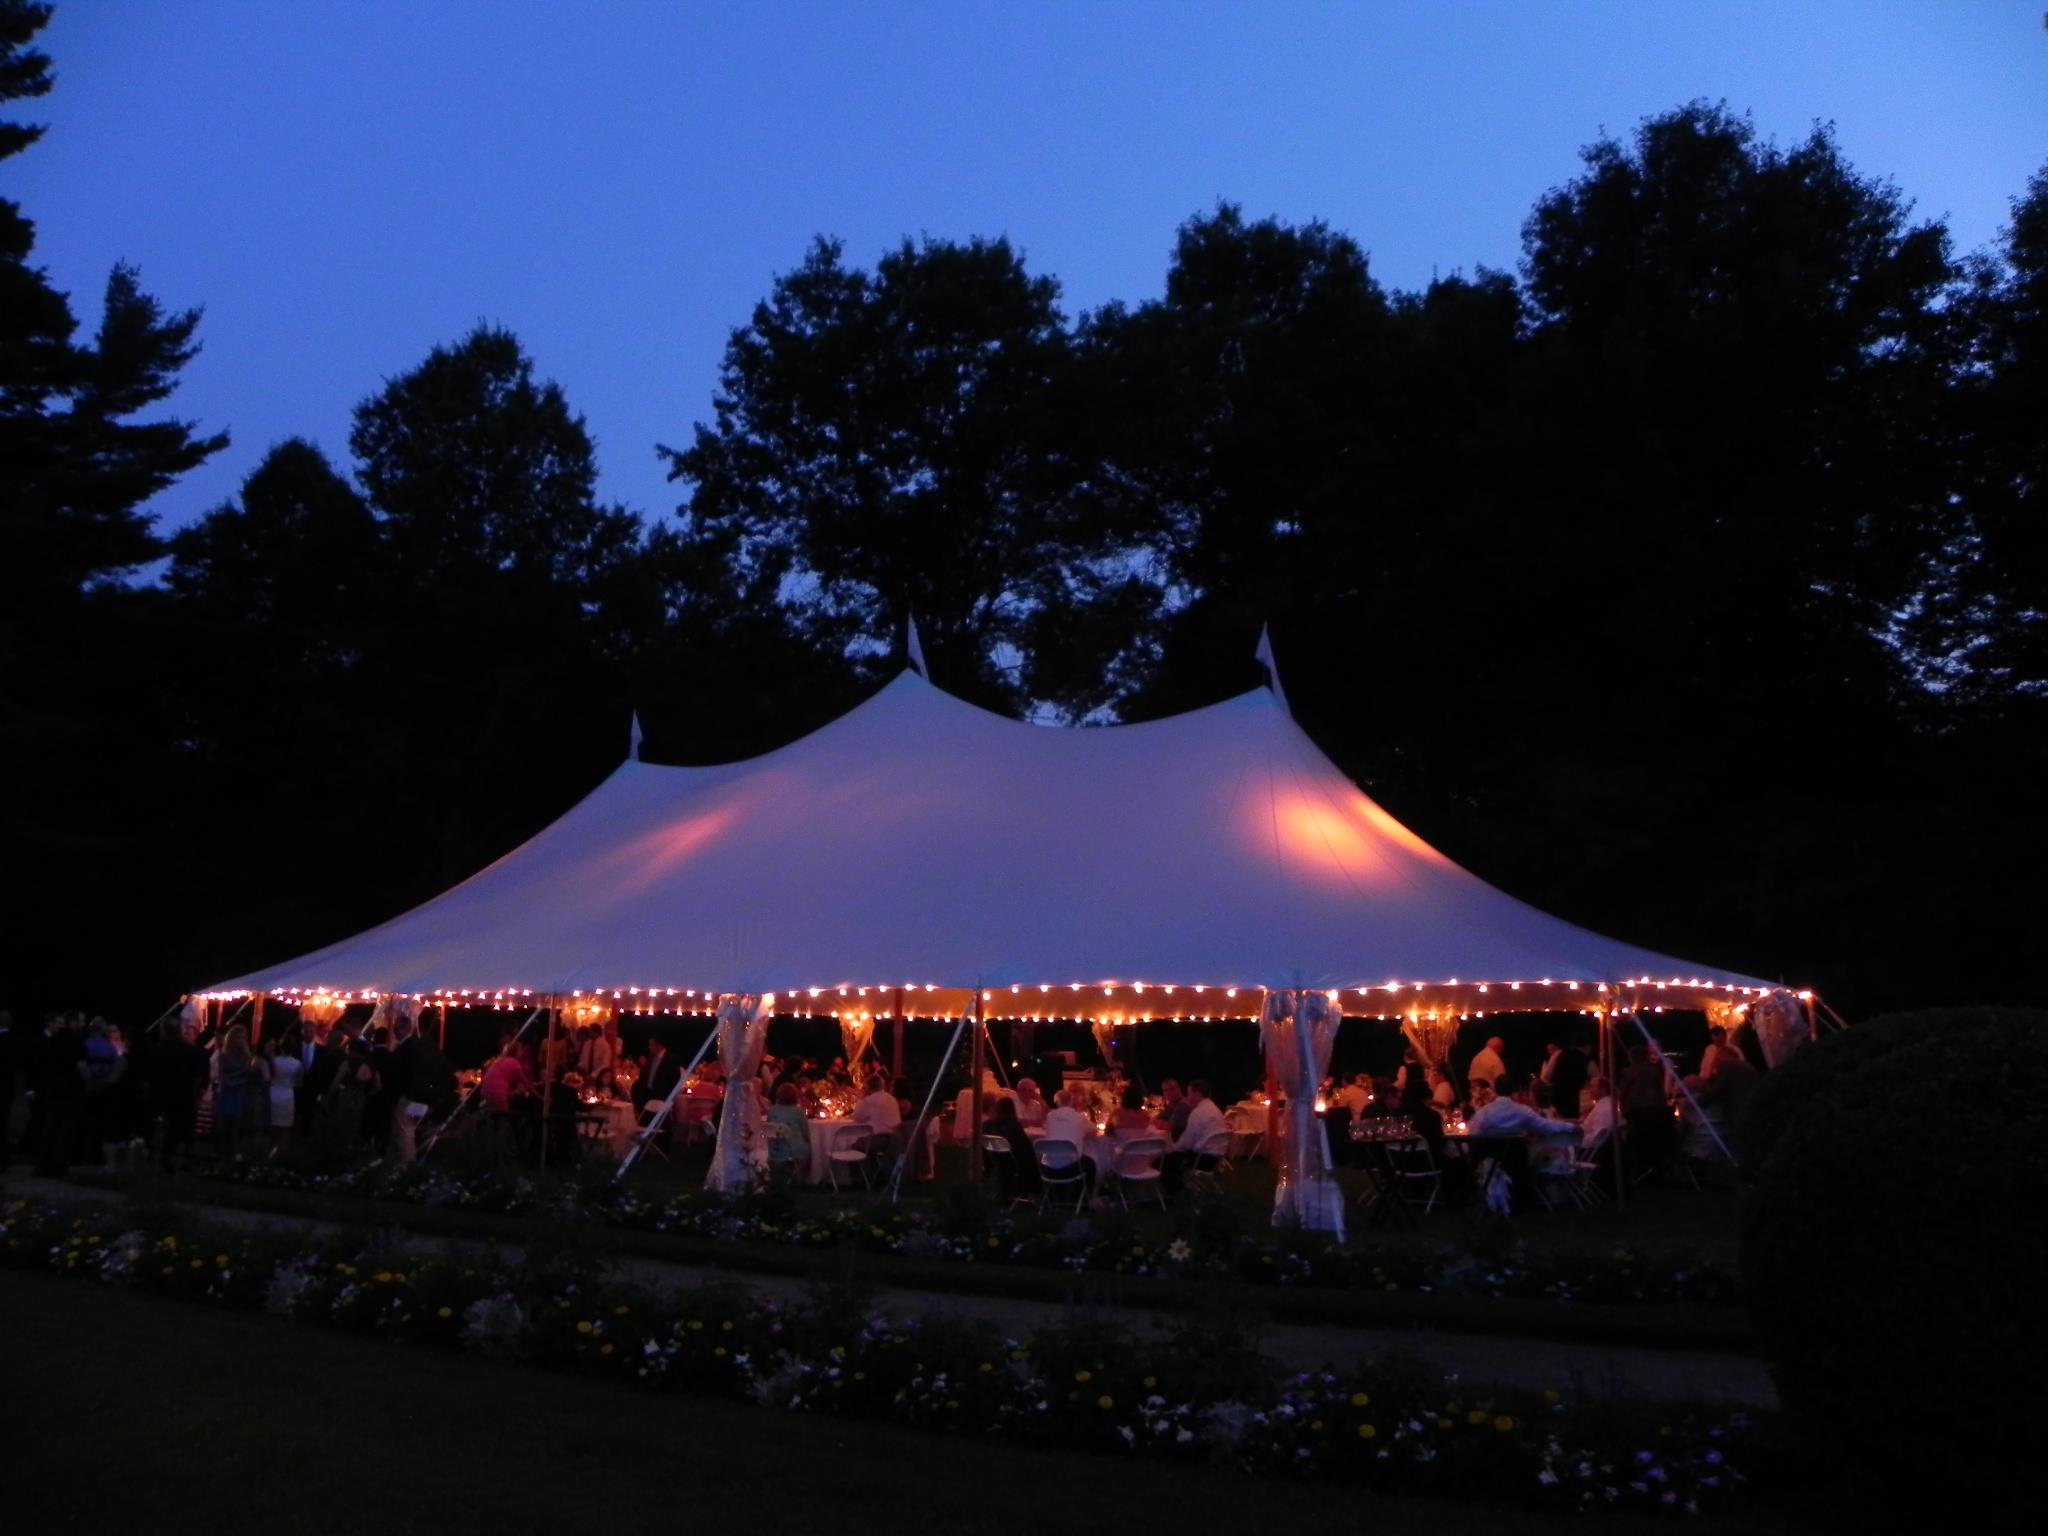 Perimeter Lighting and Par Can Uplights in A Tidewater Tent